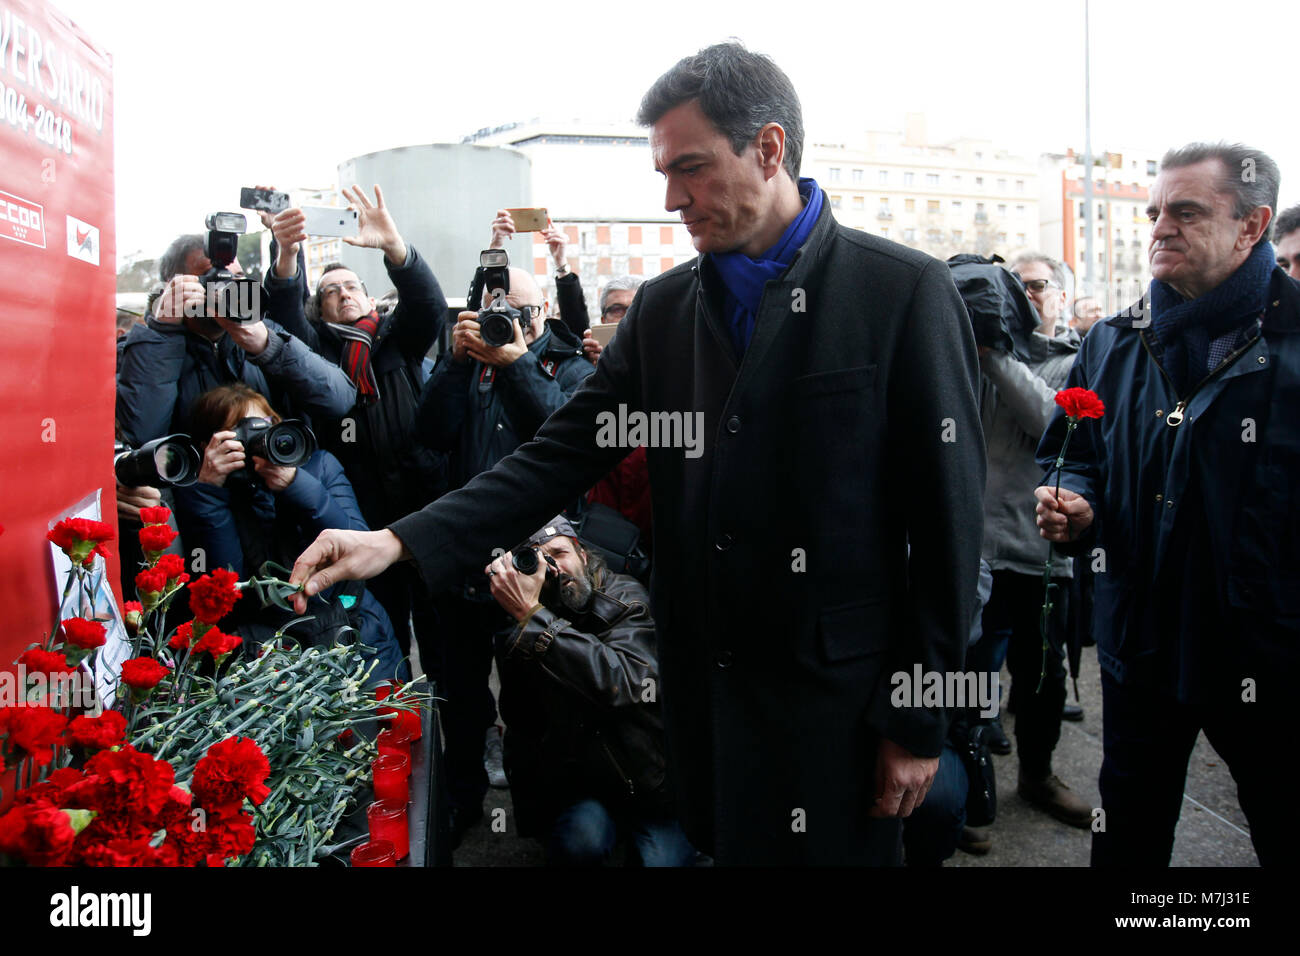 Madrid, Spain. 11th March, 2018. Politican Pedro Sanchez during a tribute in memory of the victims of the attack of 11-M 2004, at the train station of Atocha on Sunday 11 March 2018. Credit: Gtres Información más Comuniación on line, S.L./Alamy Live News Stock Photo